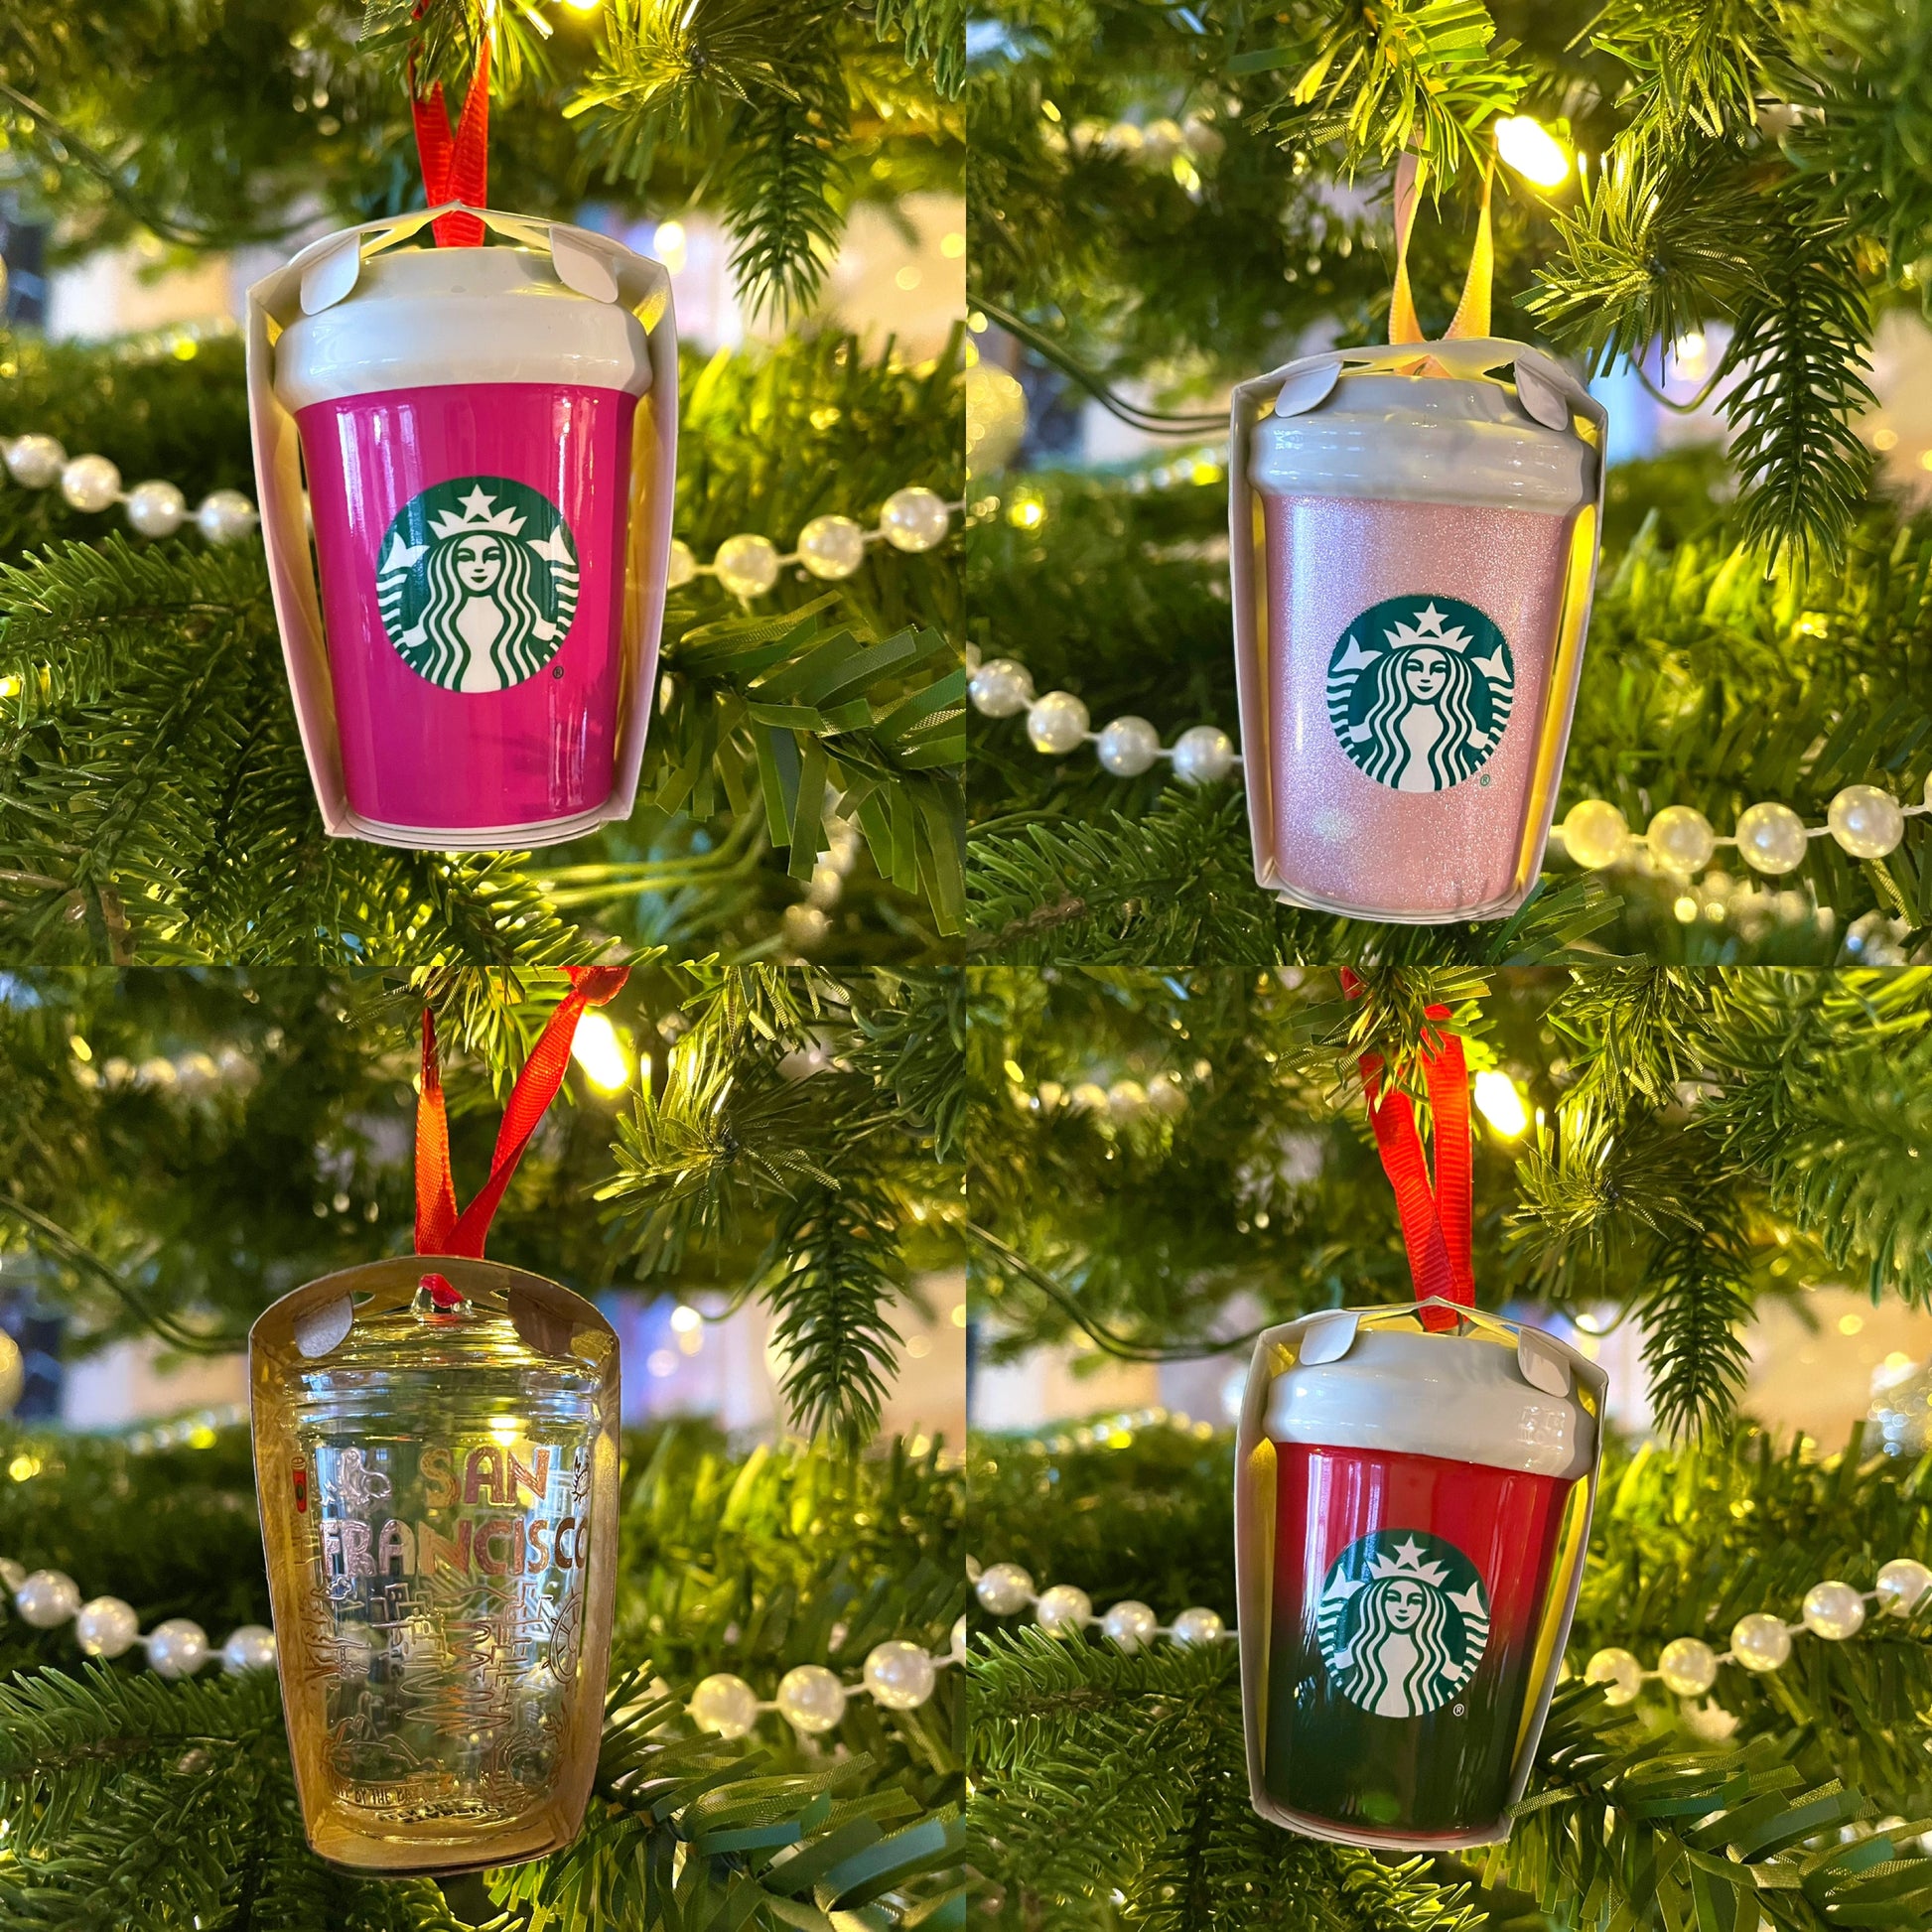 ❄️ 2023 Starbucks Mexico Winter Collection Christmas Ornaments Set ❄️